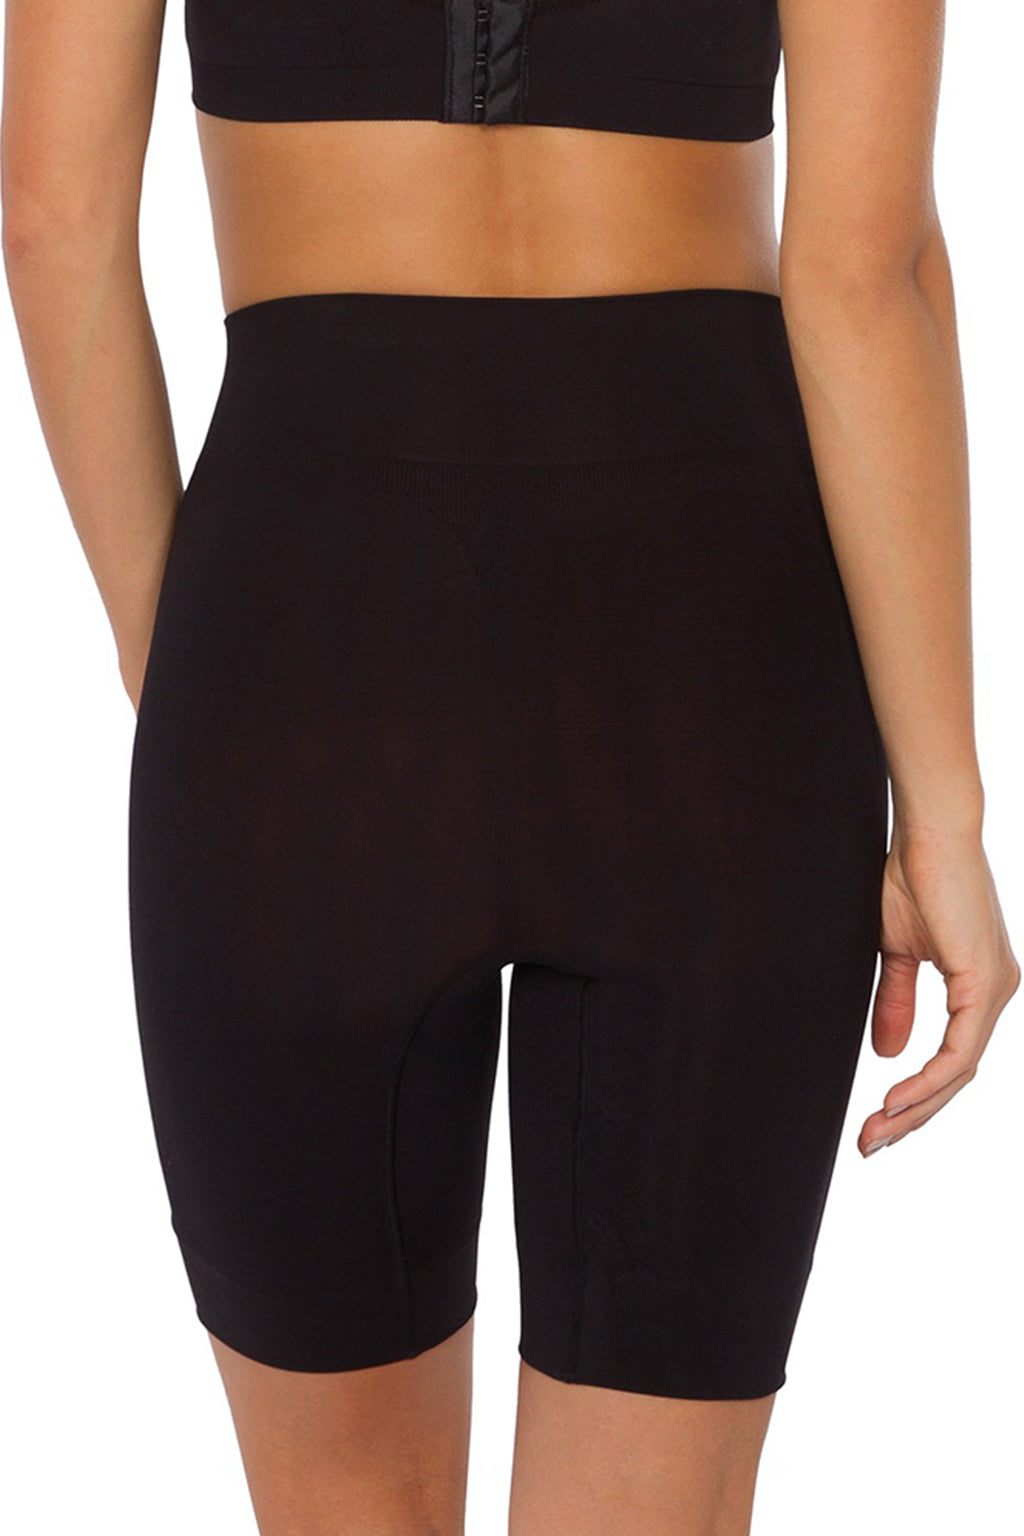 Bermuda shapewear, Brazilian activewear for waist and stomach, tightens your waist immediately